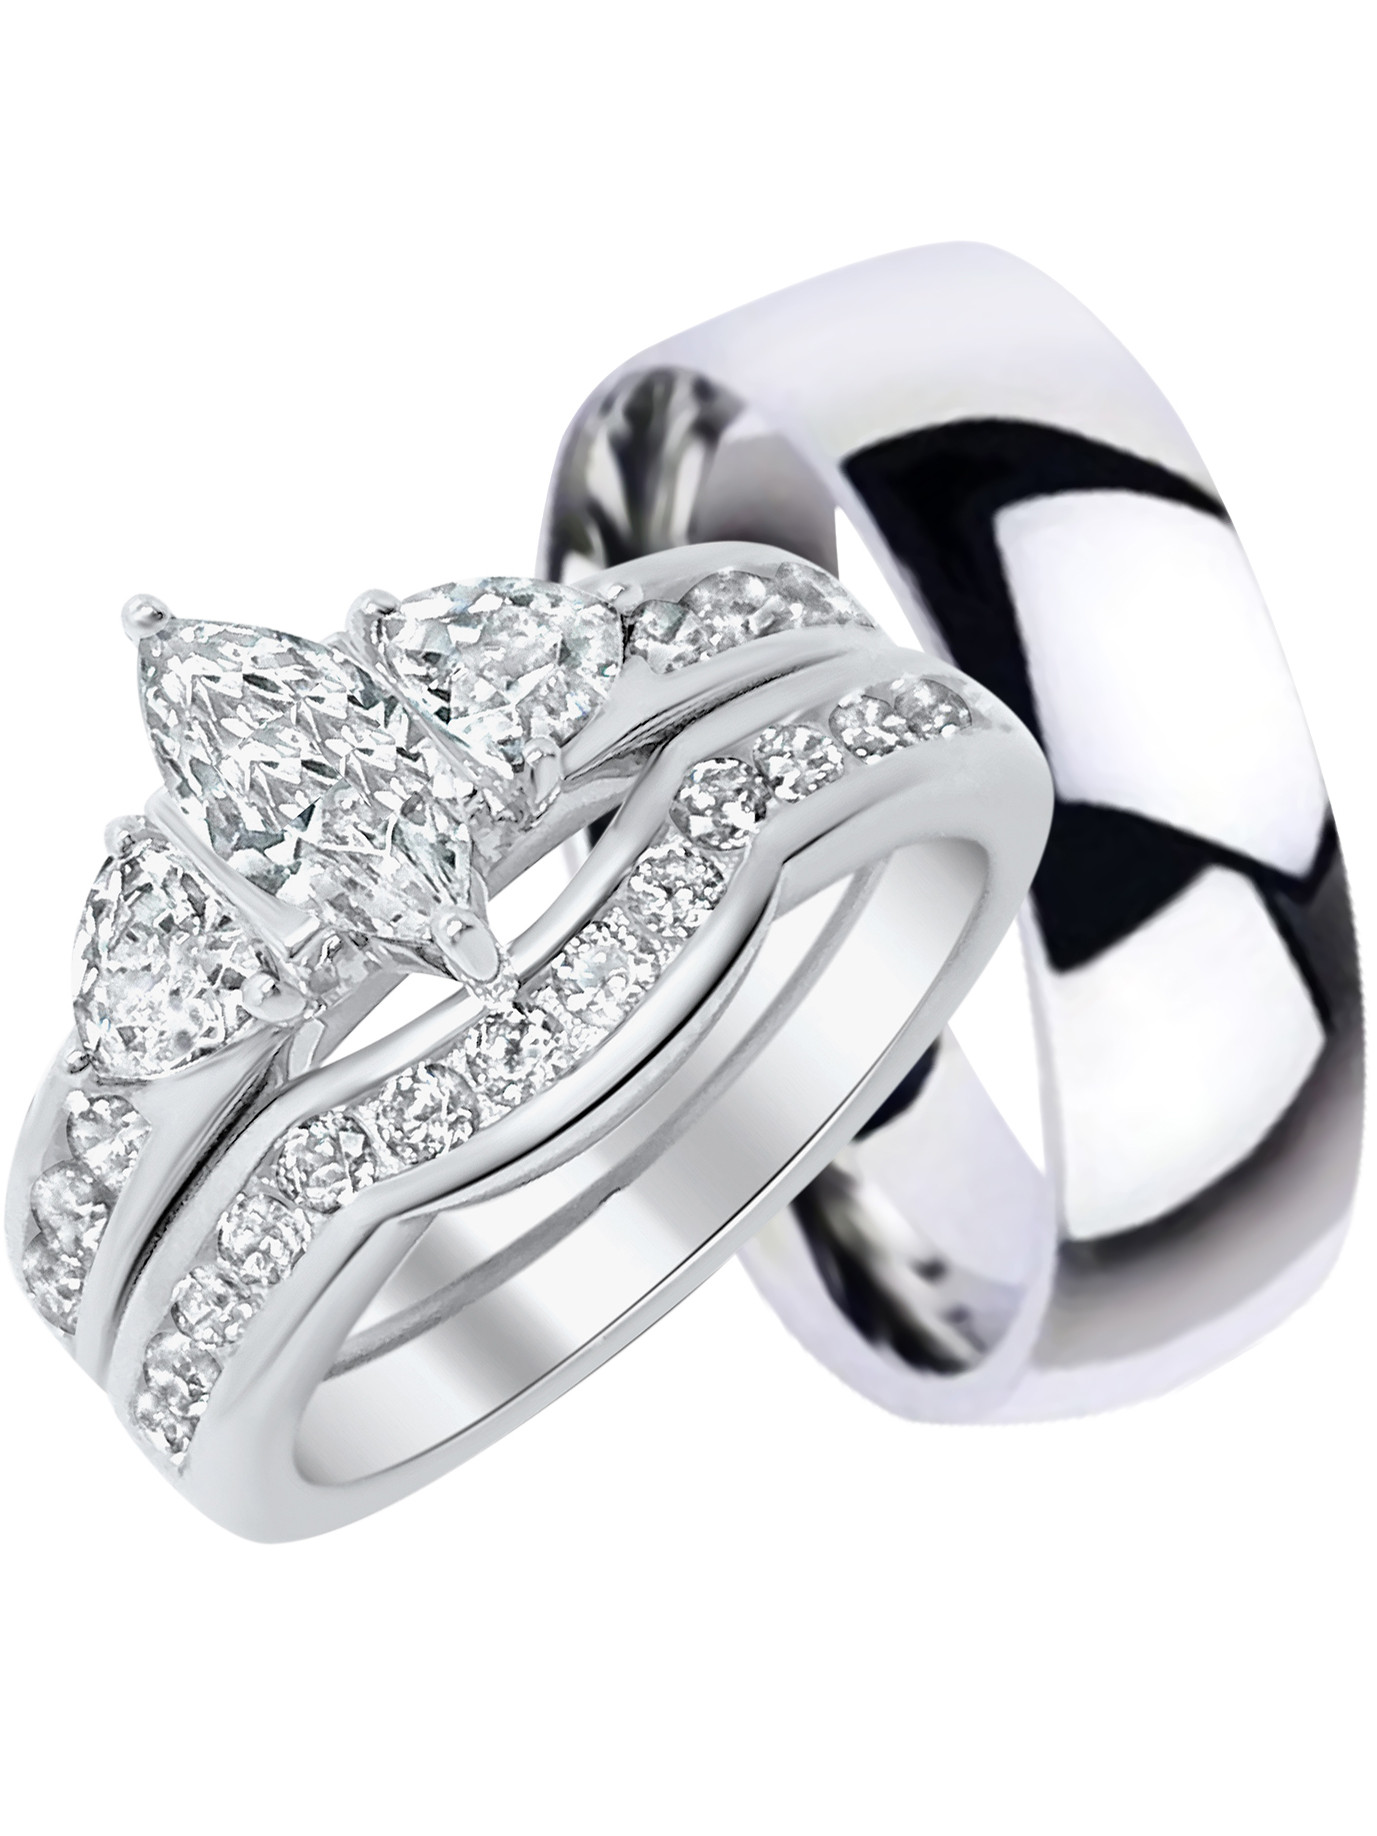 Silver Wedding Rings For Her
 His and Hers Wedding Ring Set Matching Trio Wedding Bands